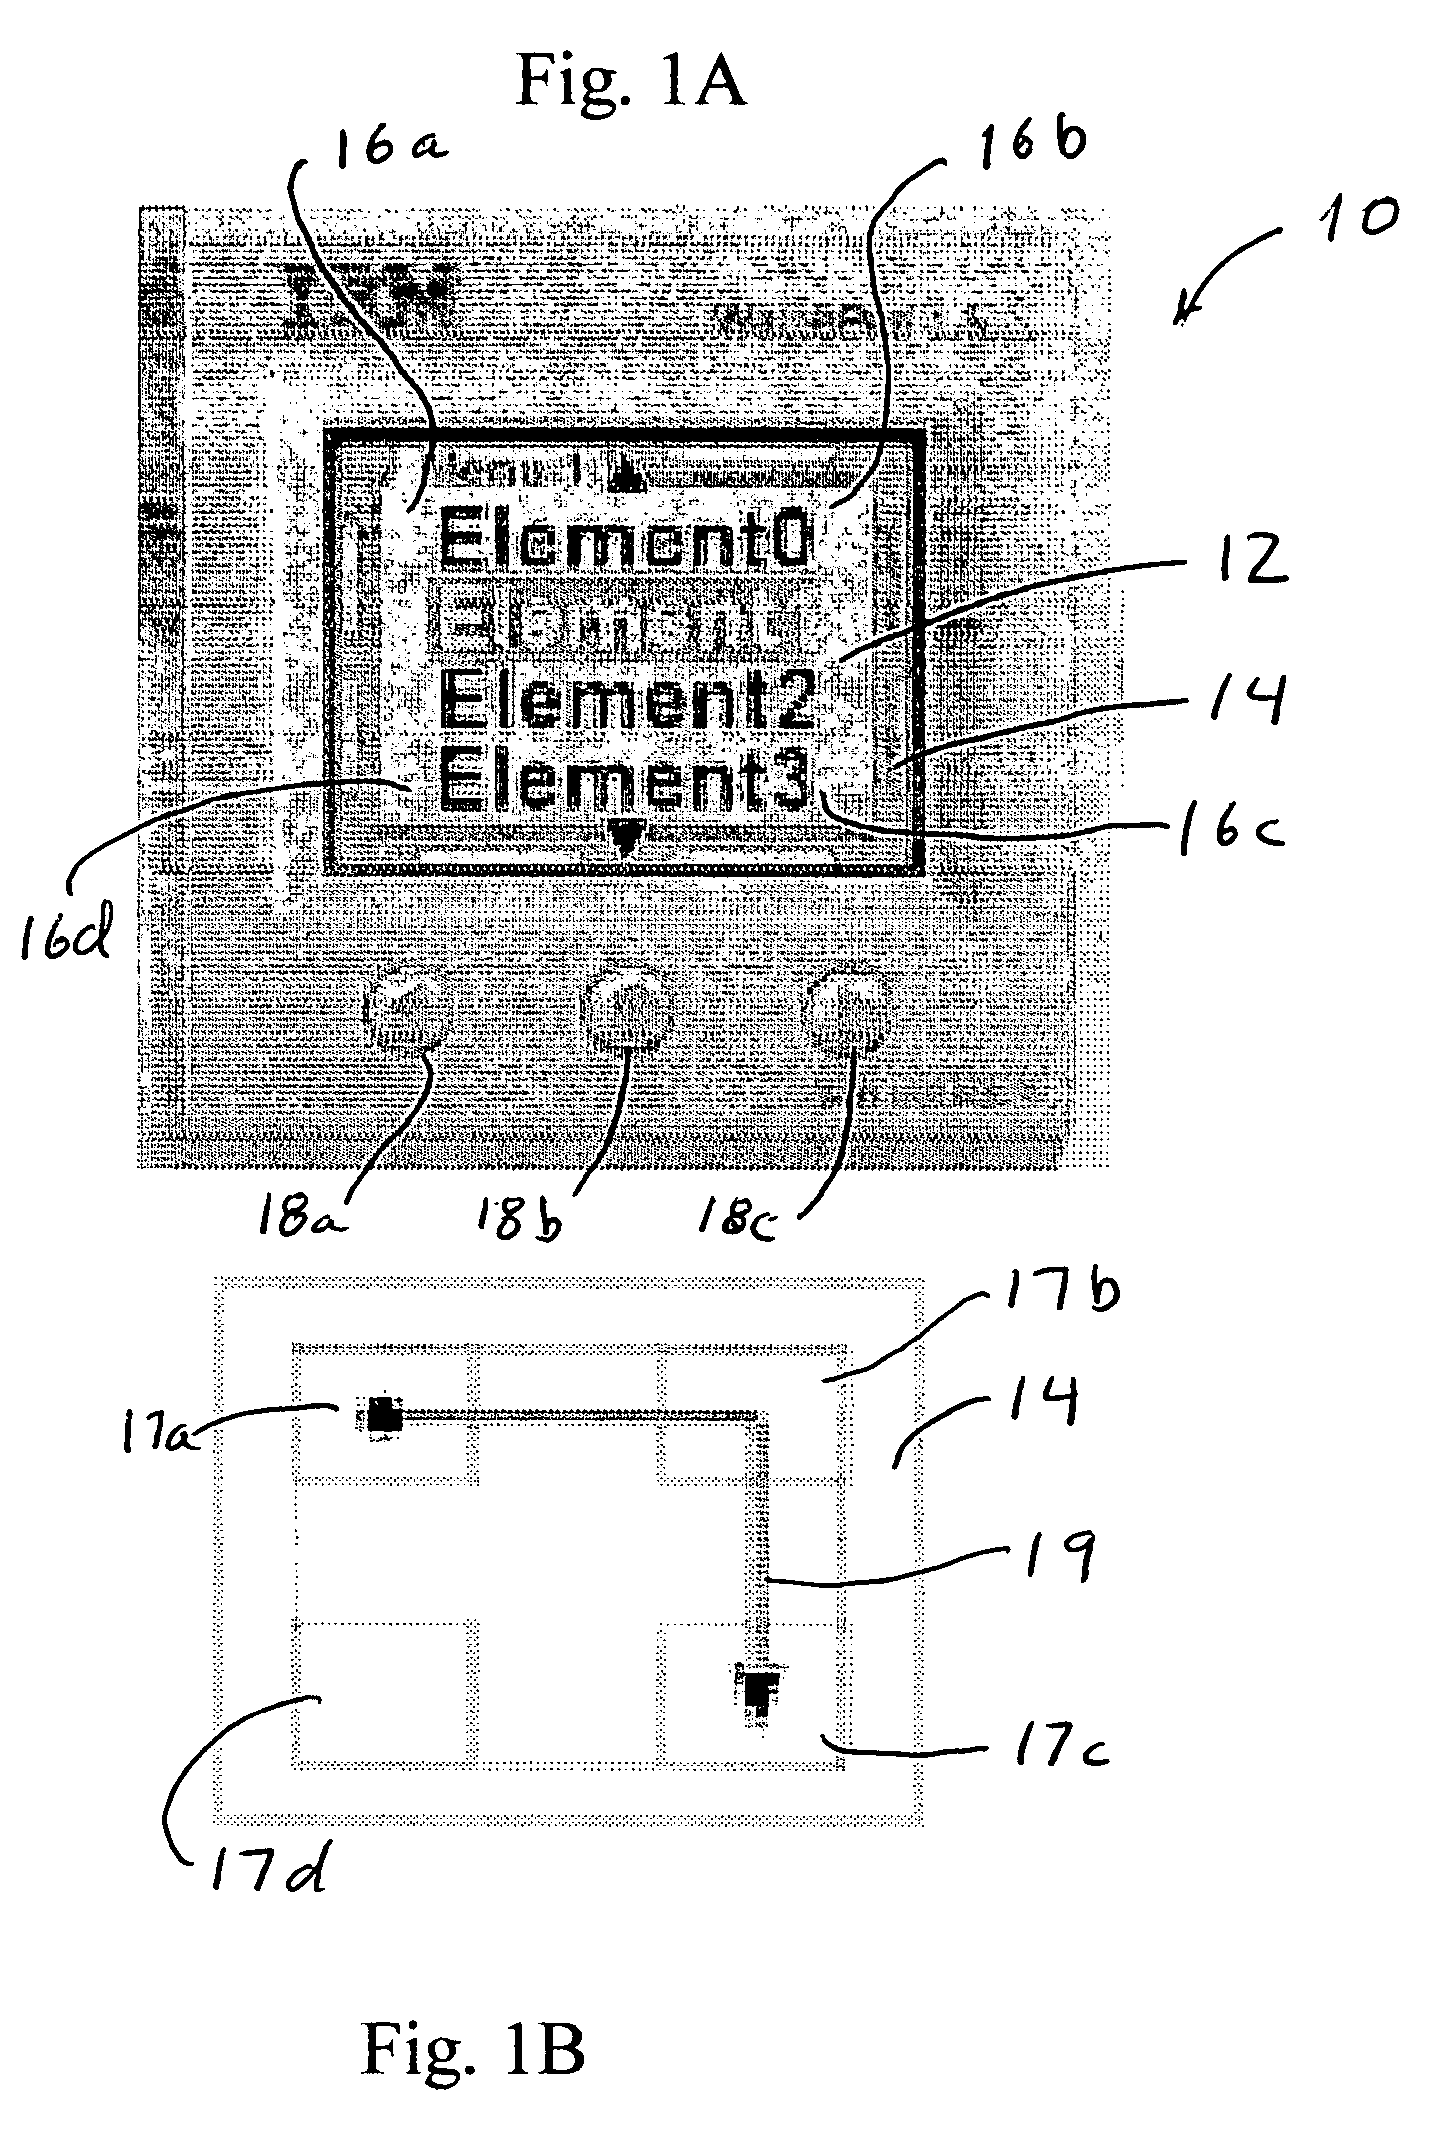 Input method and apparatus using tactile guidance and bi-directional segmented stroke